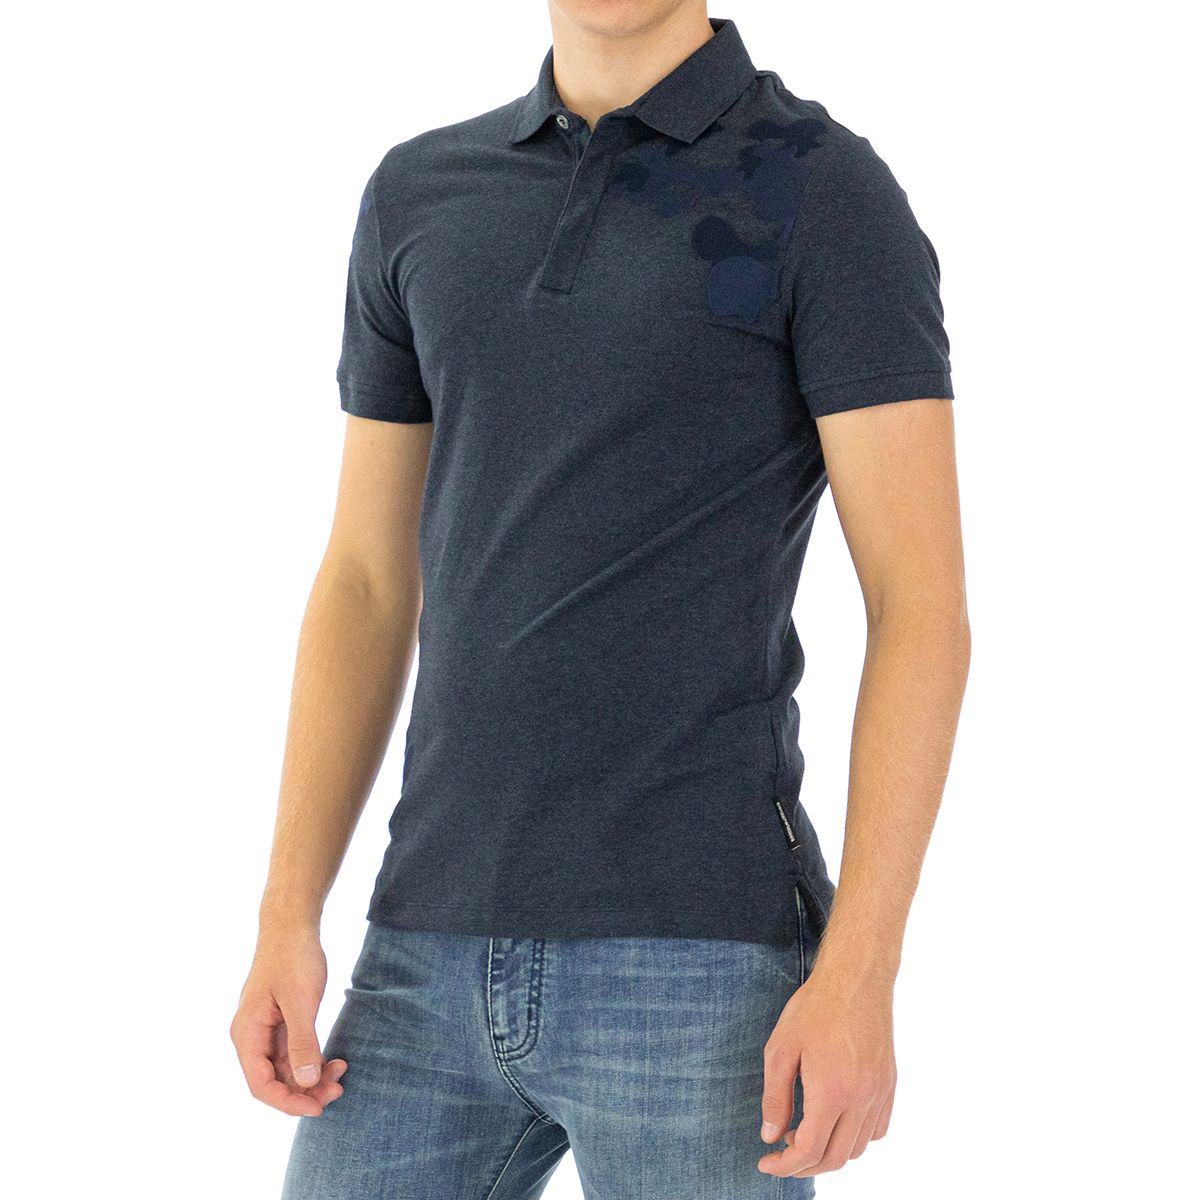 Emporio Armani 6Z1FA61J18Z-0955-S If you're looking for an alternative to the classic T-shirt, this navy-blue polo shirt will complement any casual look.